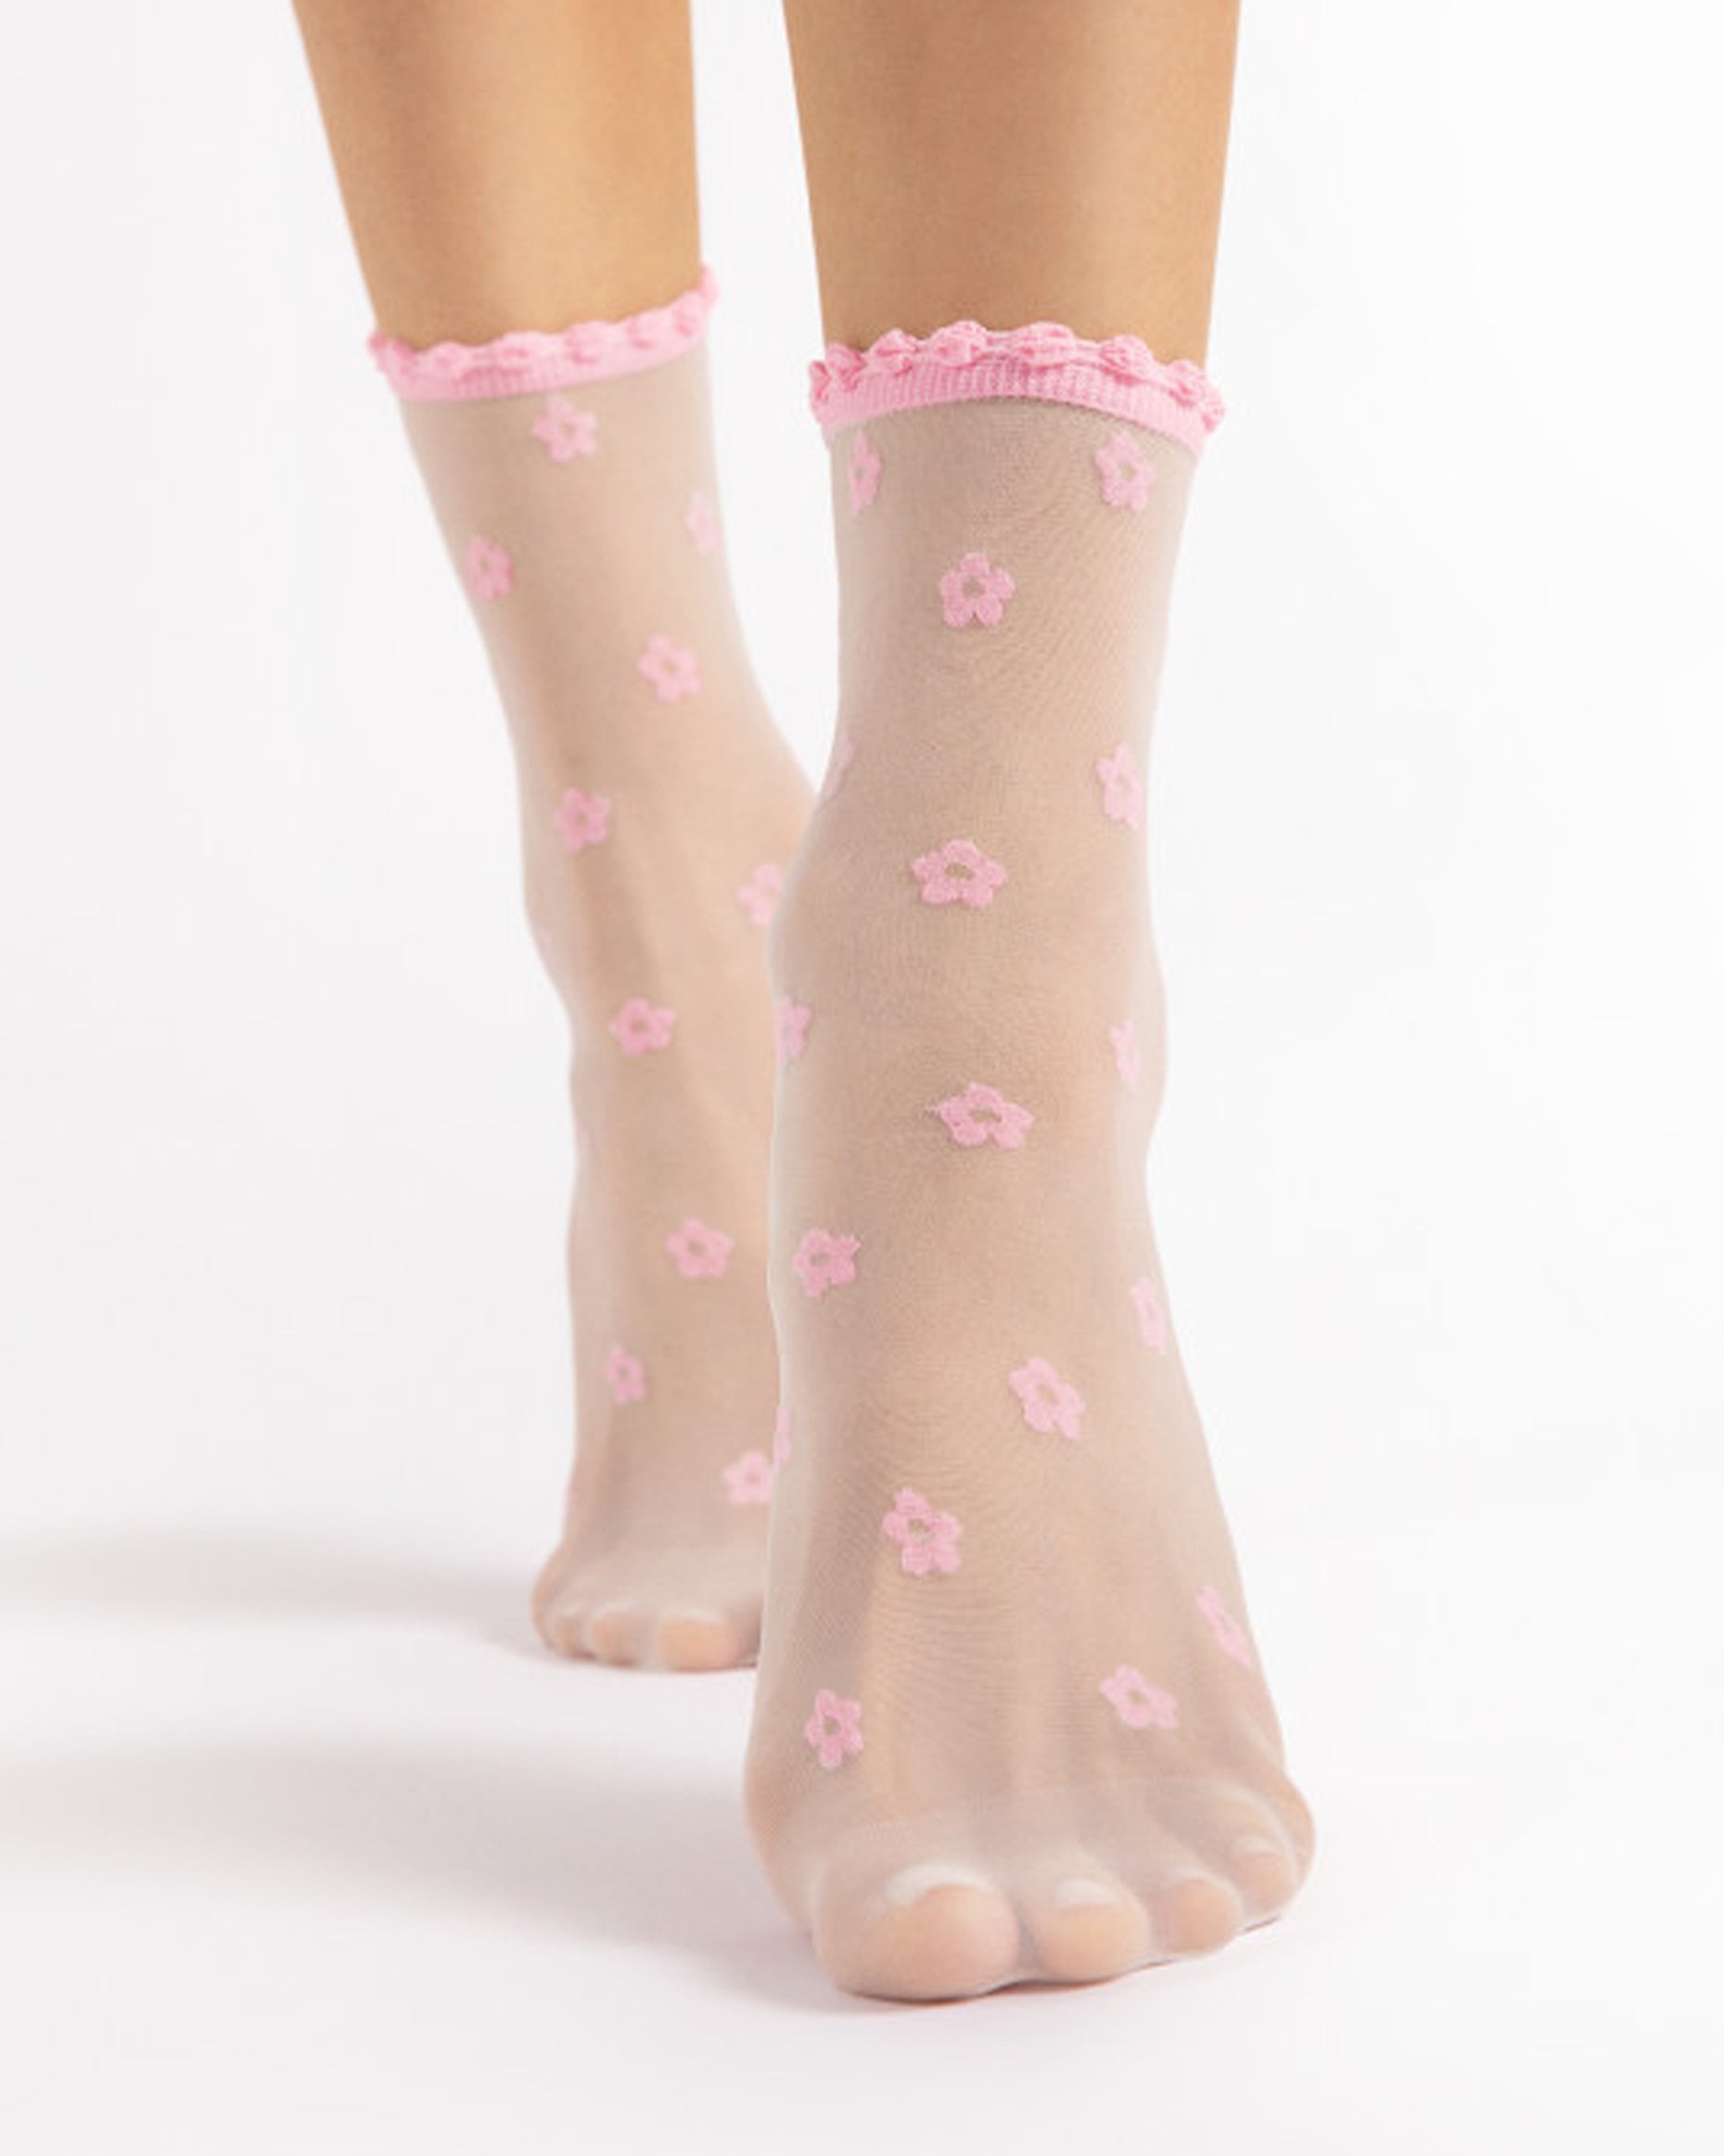 Fiore April Socks - Sheer pale pink fashion ankle socks with an all over daisy plower pattern, frilly scalloped cuff and sheer reinforced toe.